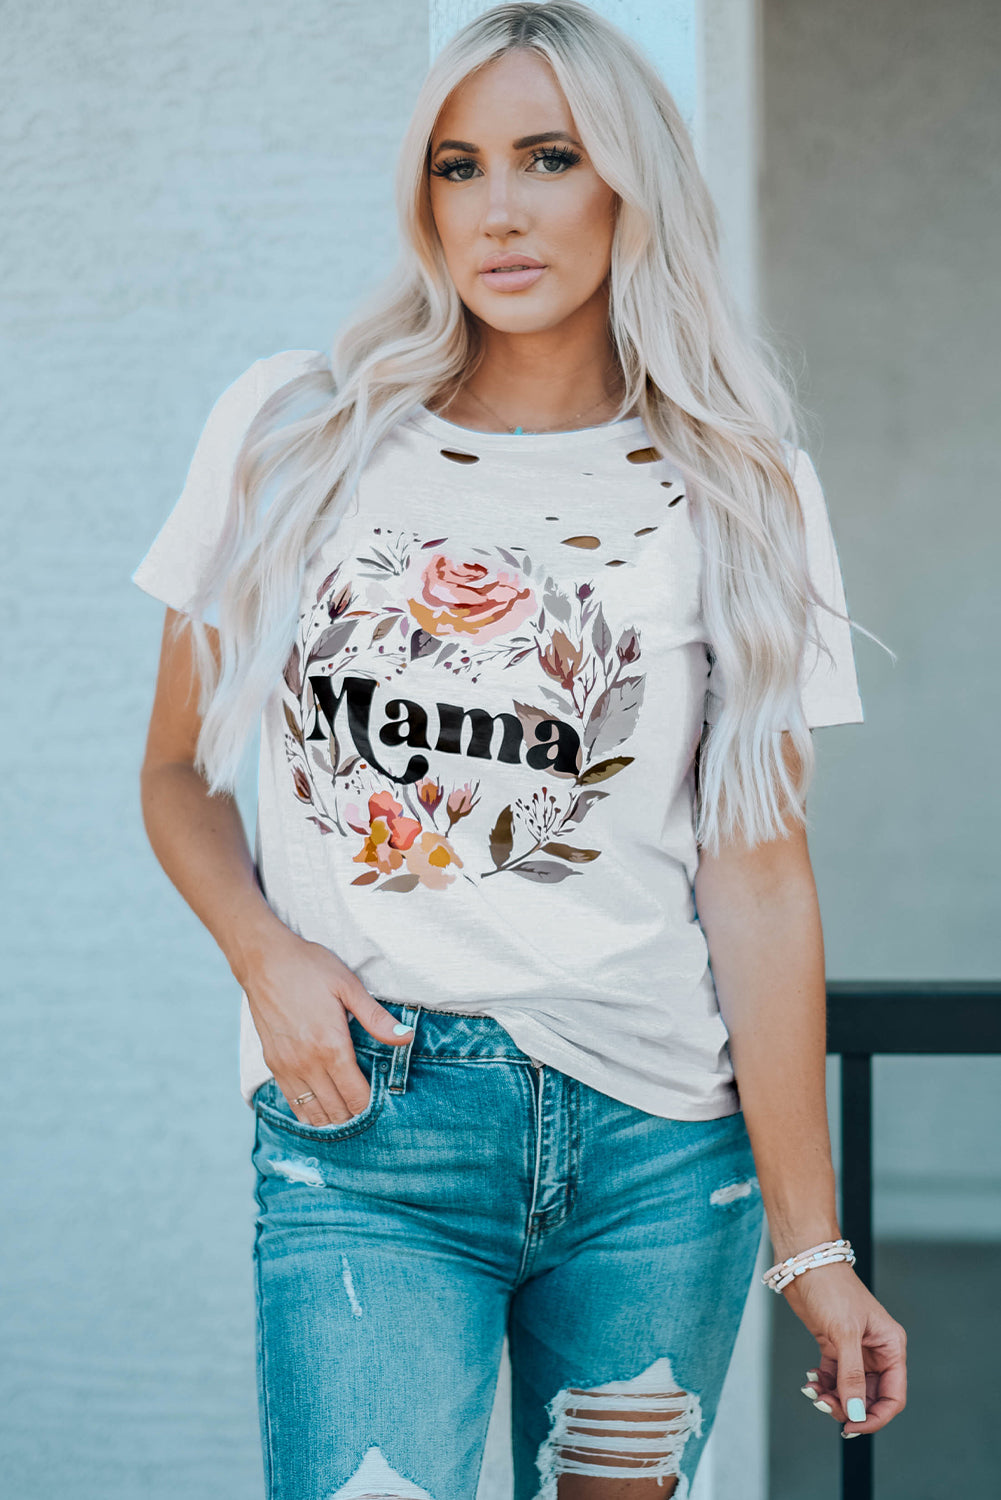 Distressed Cutout MAMA Floral Graphic Tee Shirt (Plus Size Available)